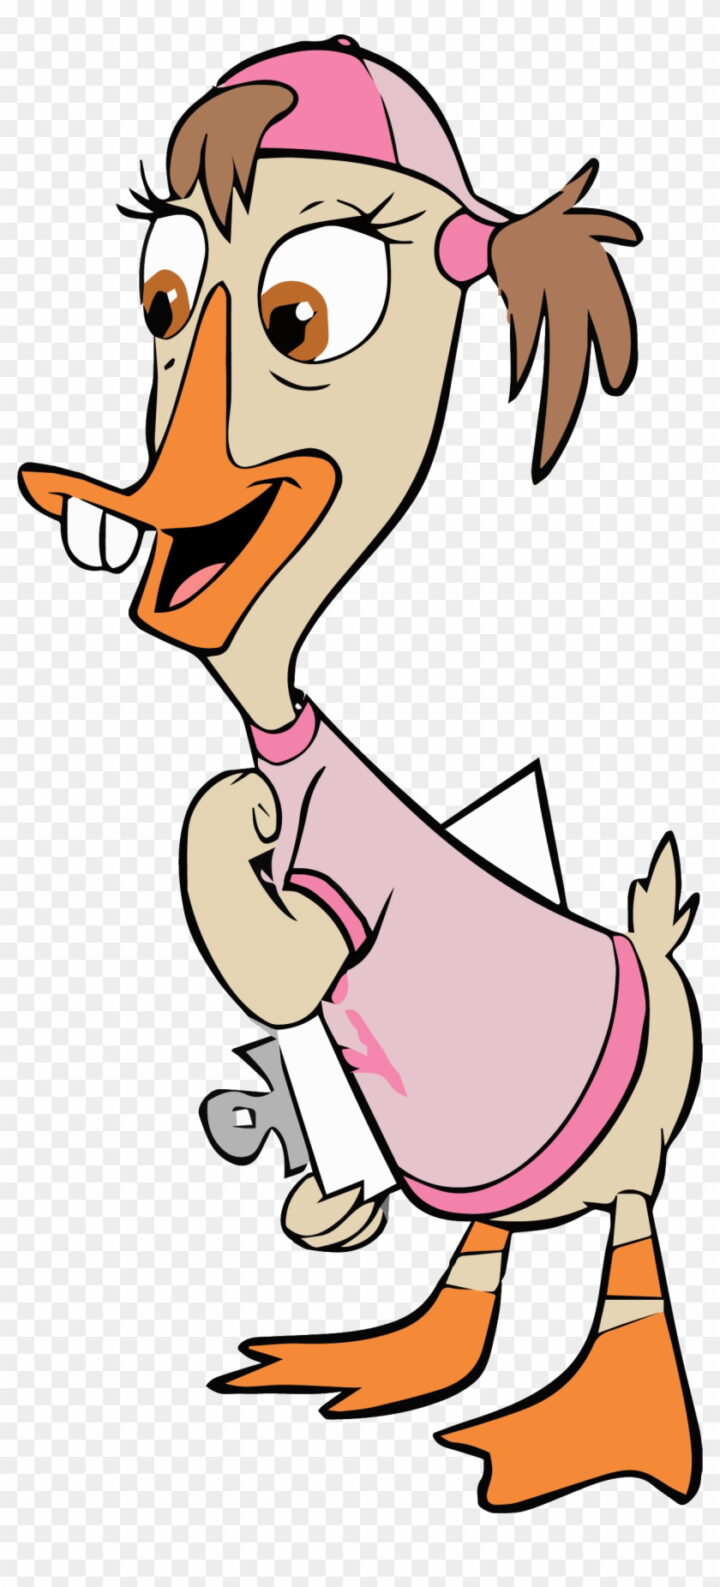 Abby Mallard Yes Clipart Png Chicken Little Image Provided.